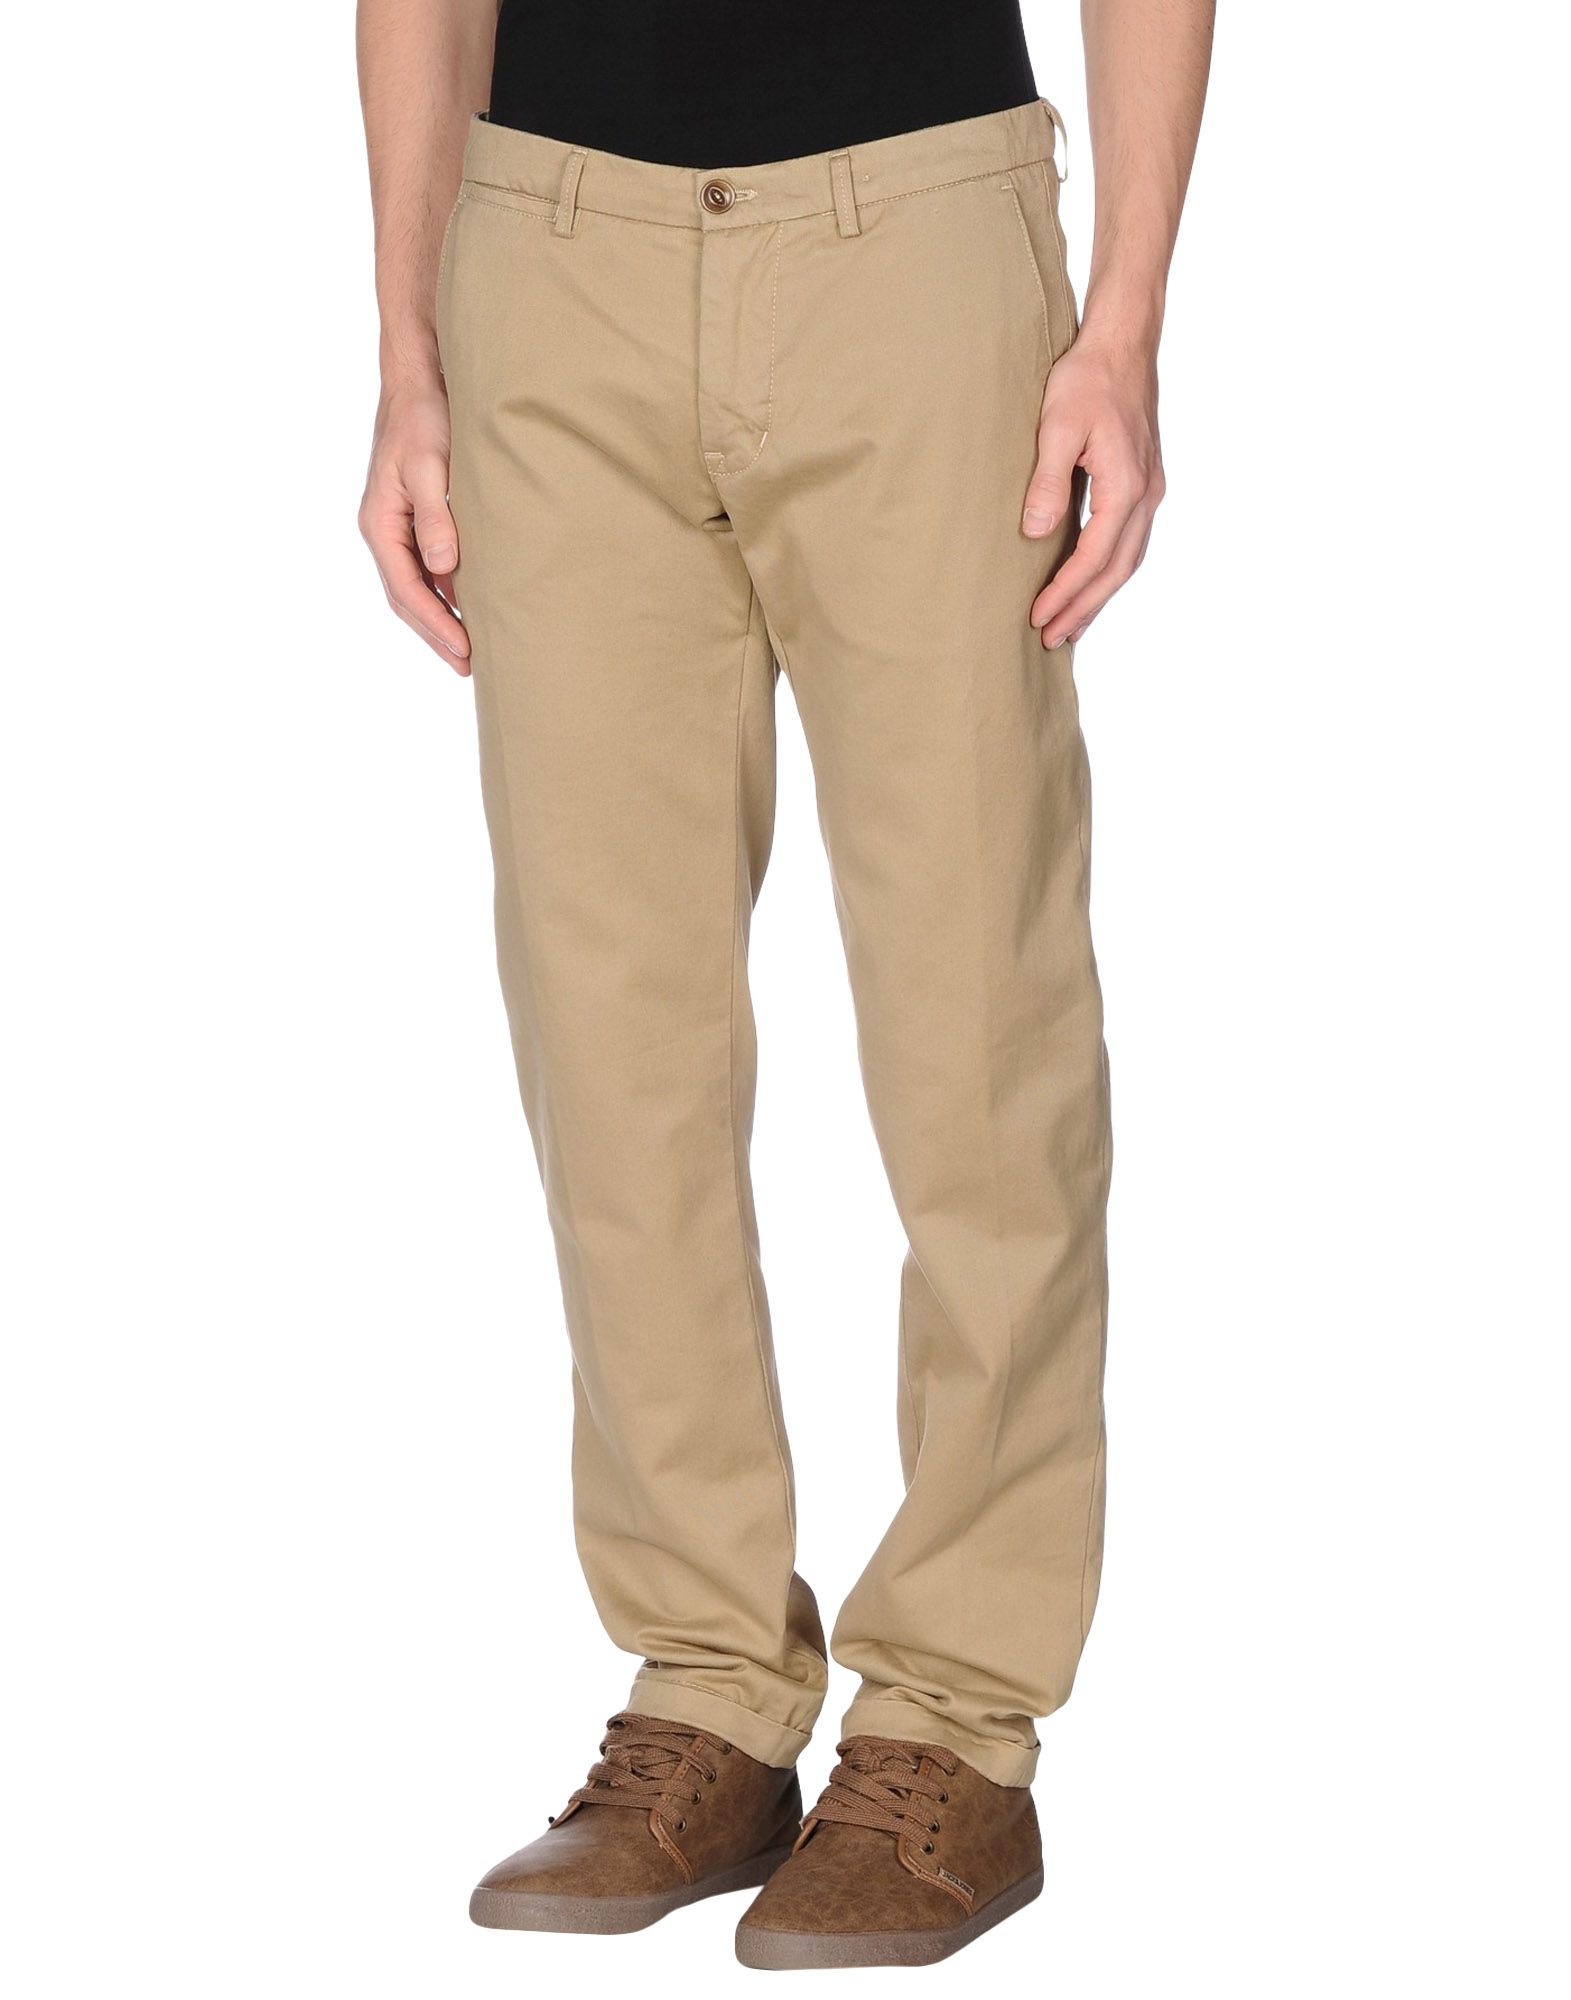 Will any of these chinos look OK/good with an OCBD in a business casual ...